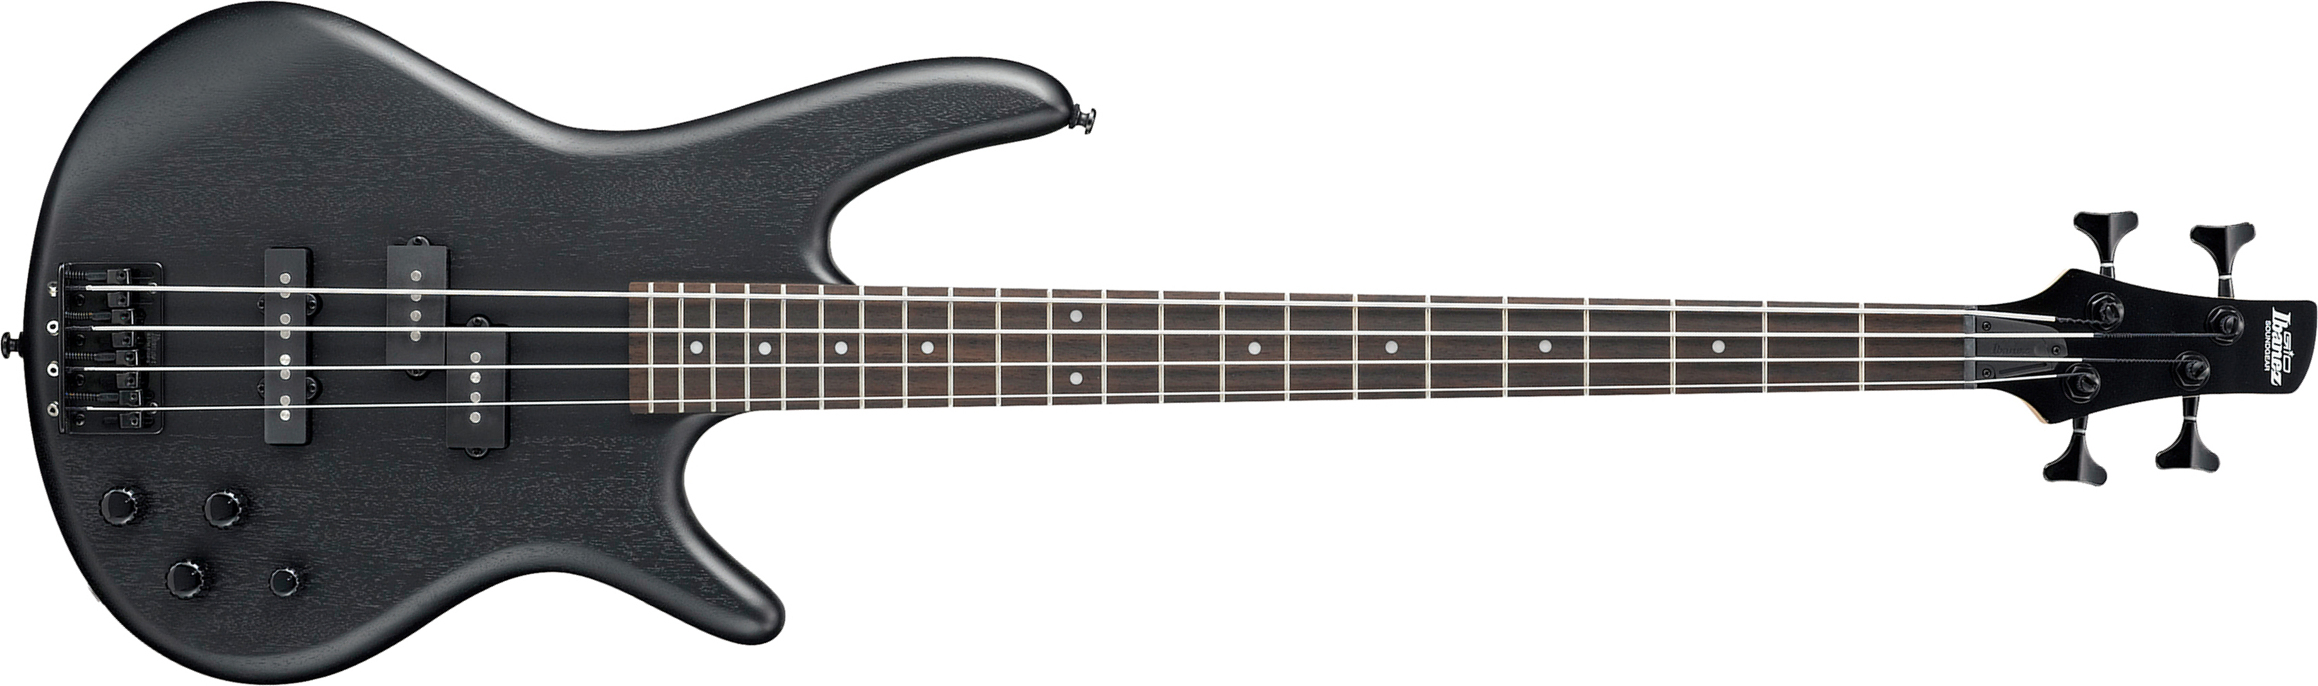 Ibanez Gsr200b Wk Gio Active Jat - Weathered Black - Solid body electric bass - Main picture